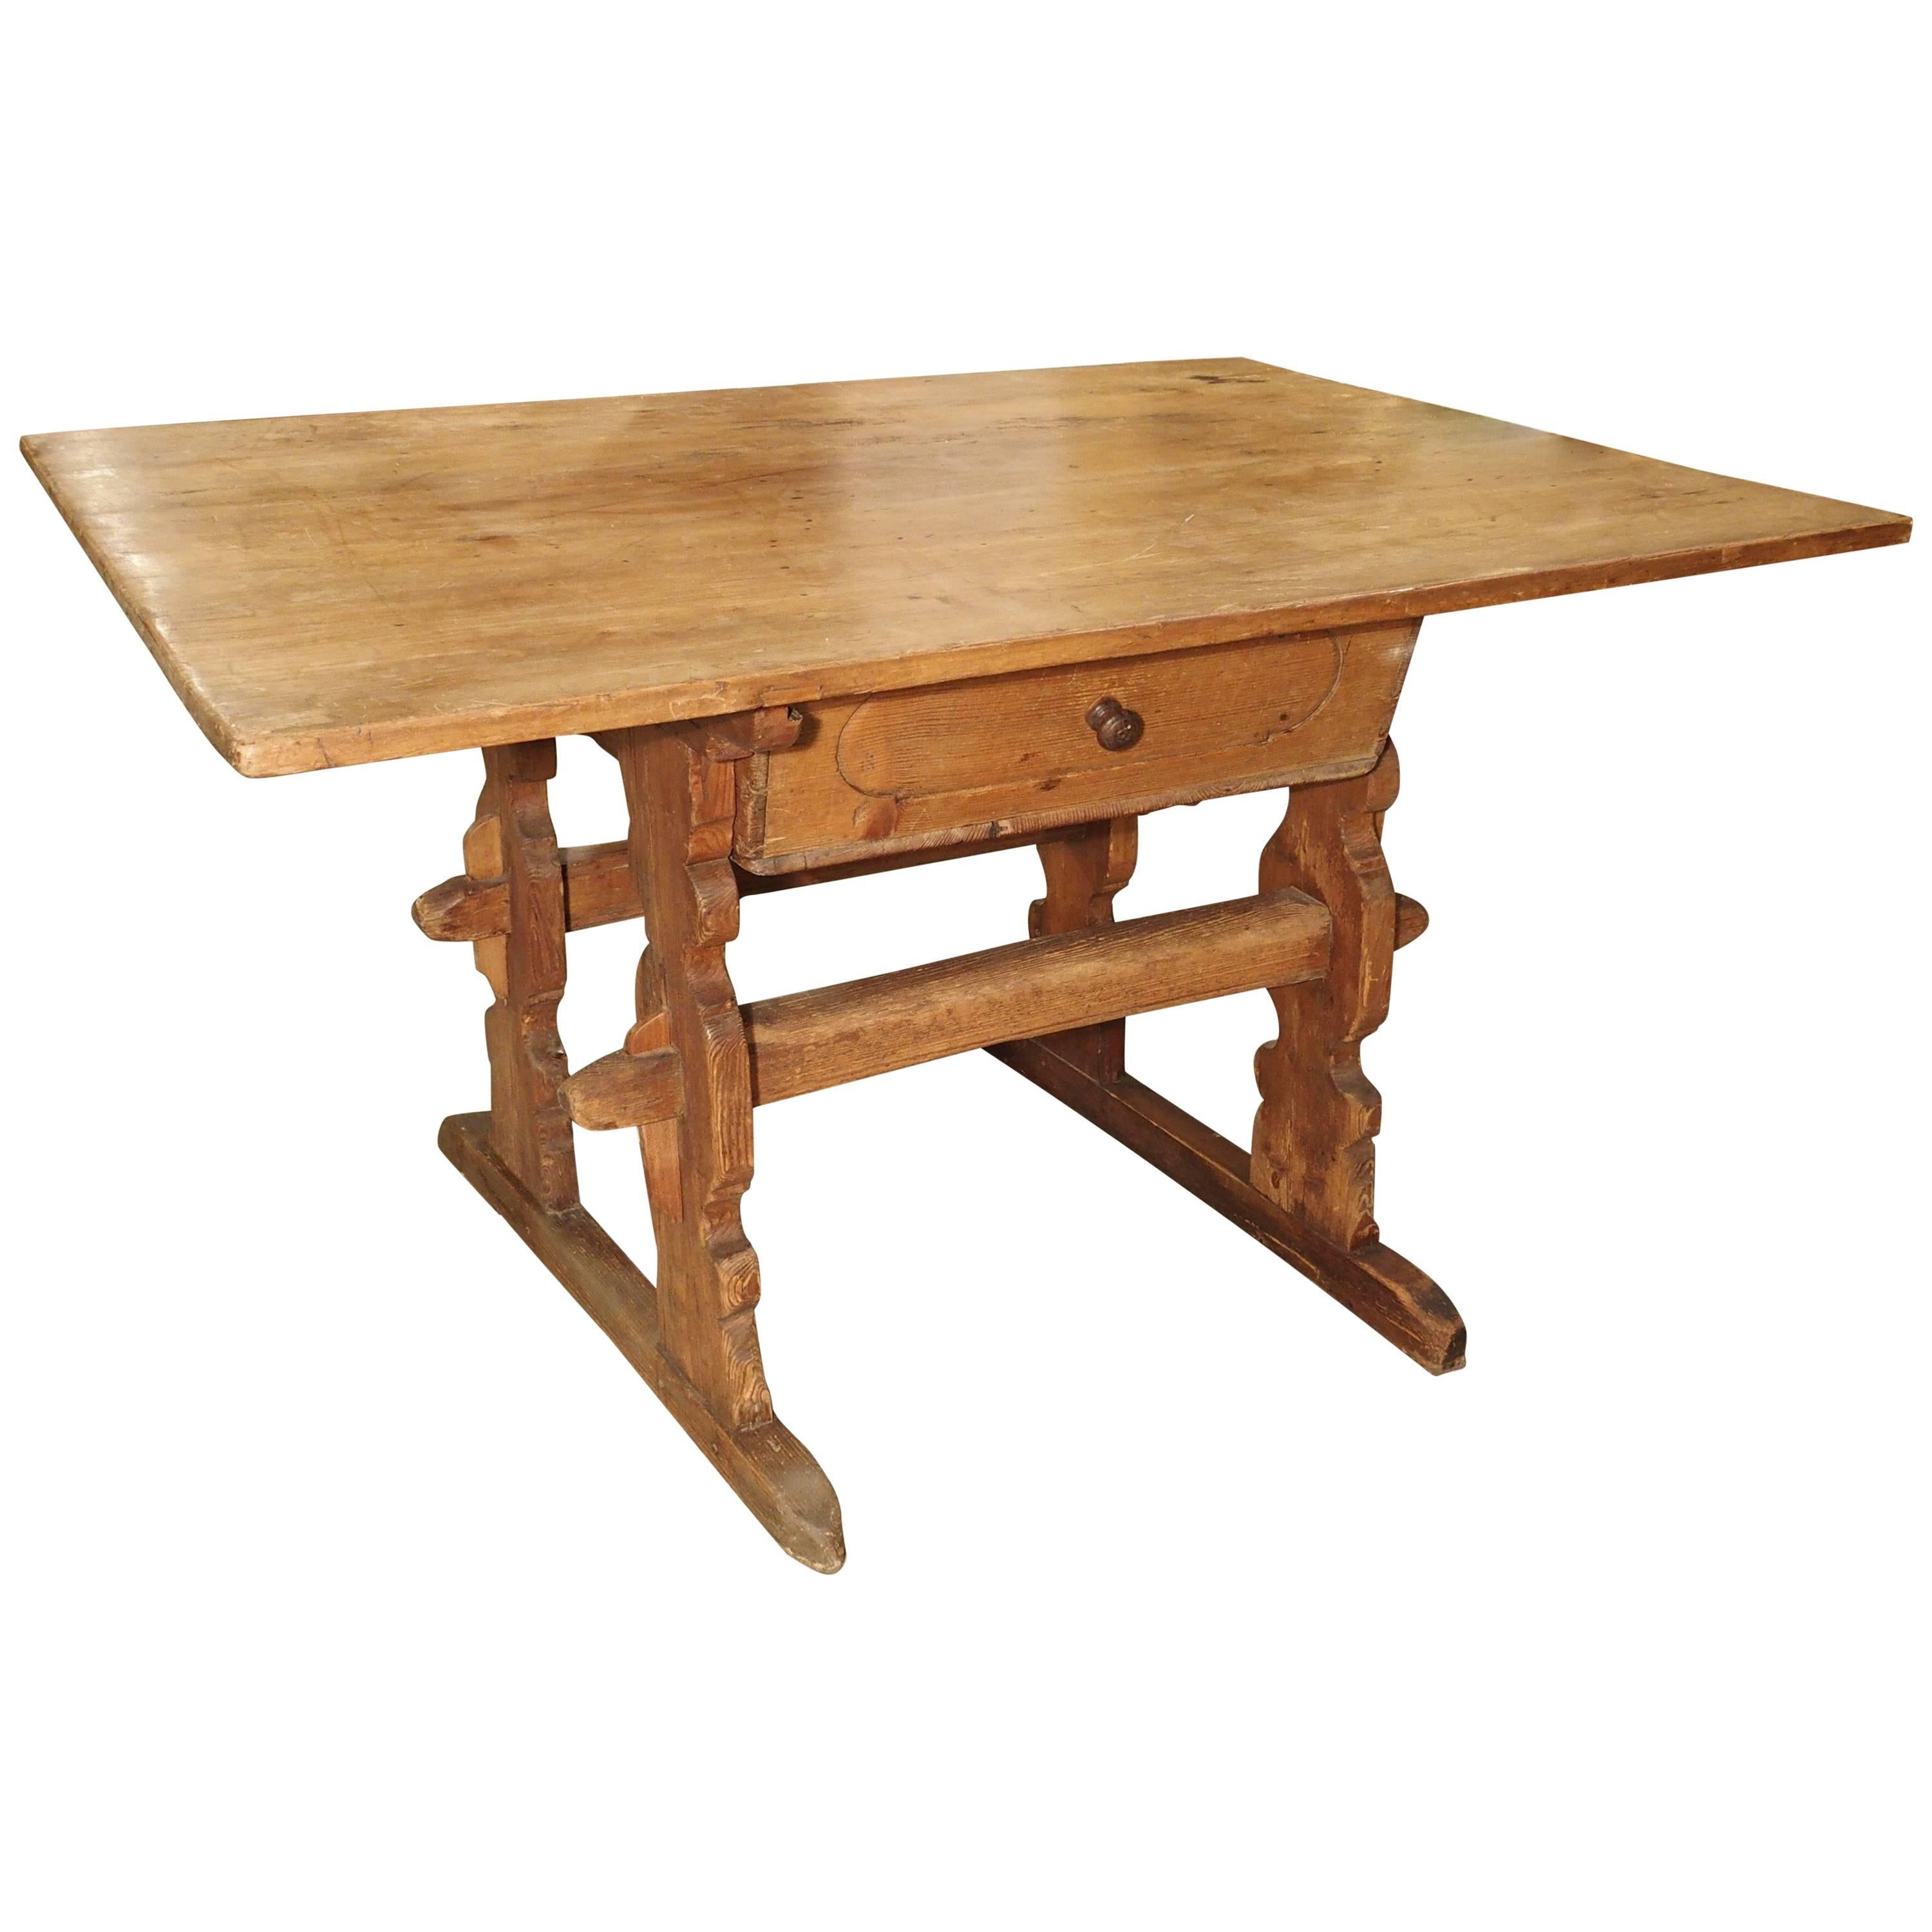 Antique Chalet Table from the Mountain Regions of France, circa 1890